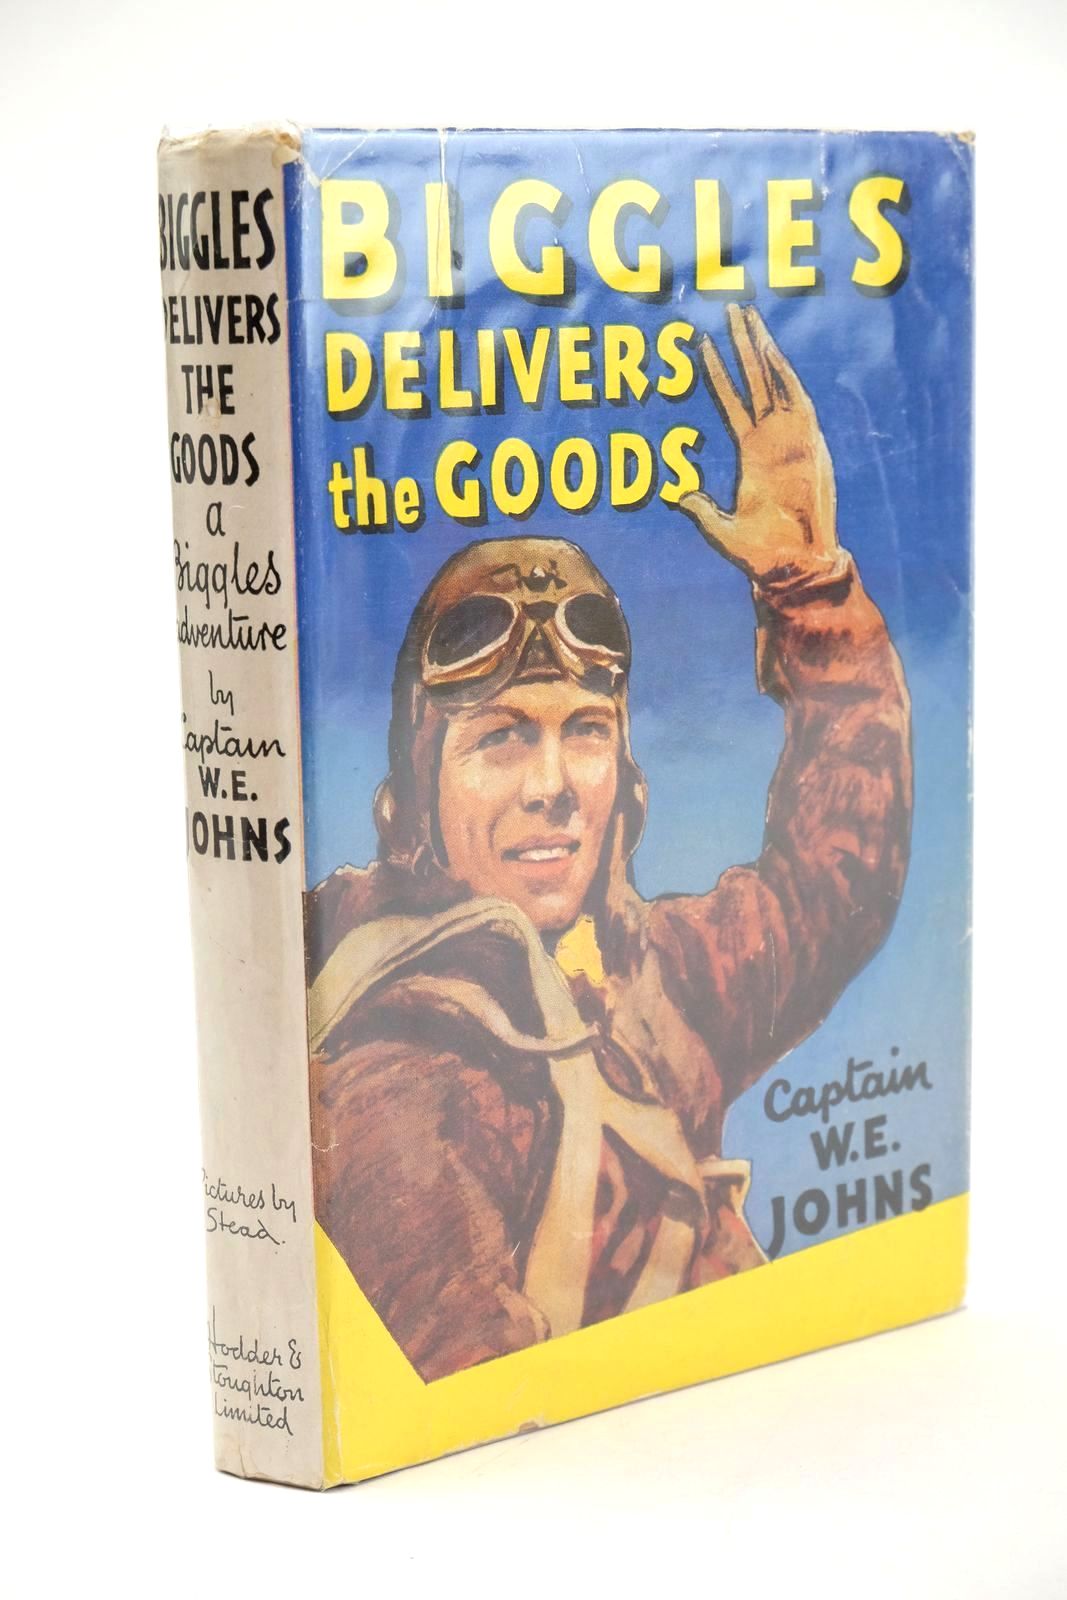 Photo of BIGGLES DELIVERS THE GOODS written by Johns, W.E. illustrated by Stead,  published by Hodder & Stoughton (STOCK CODE: 1324029)  for sale by Stella & Rose's Books